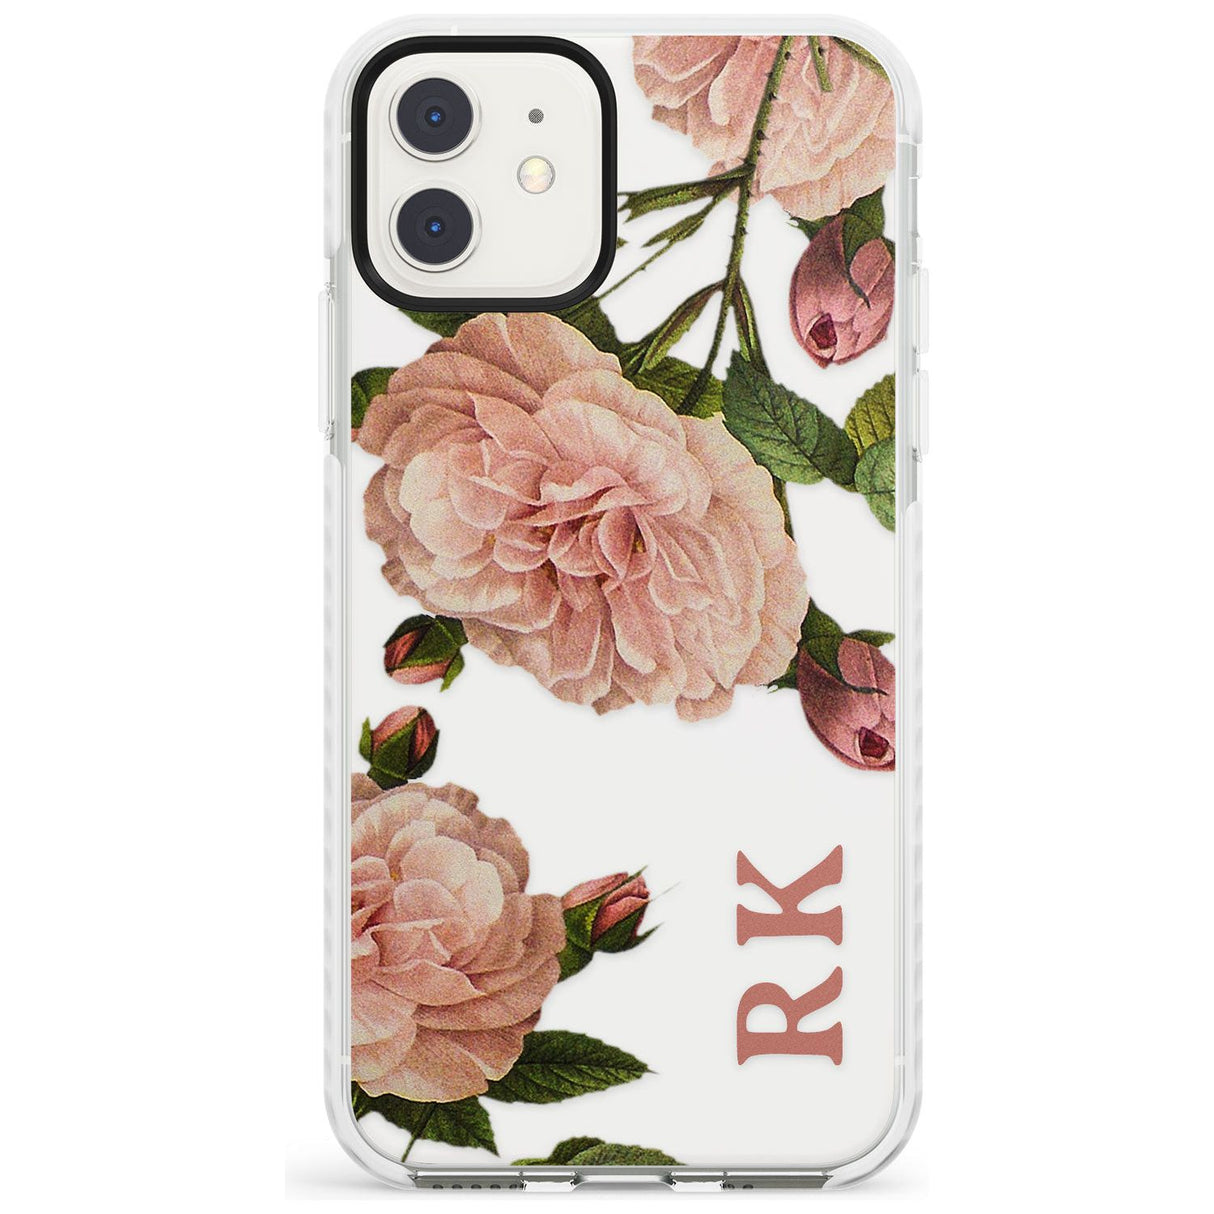 Custom Clear Vintage Floral Pale Pink Peonies Impact Phone Case for iPhone 11